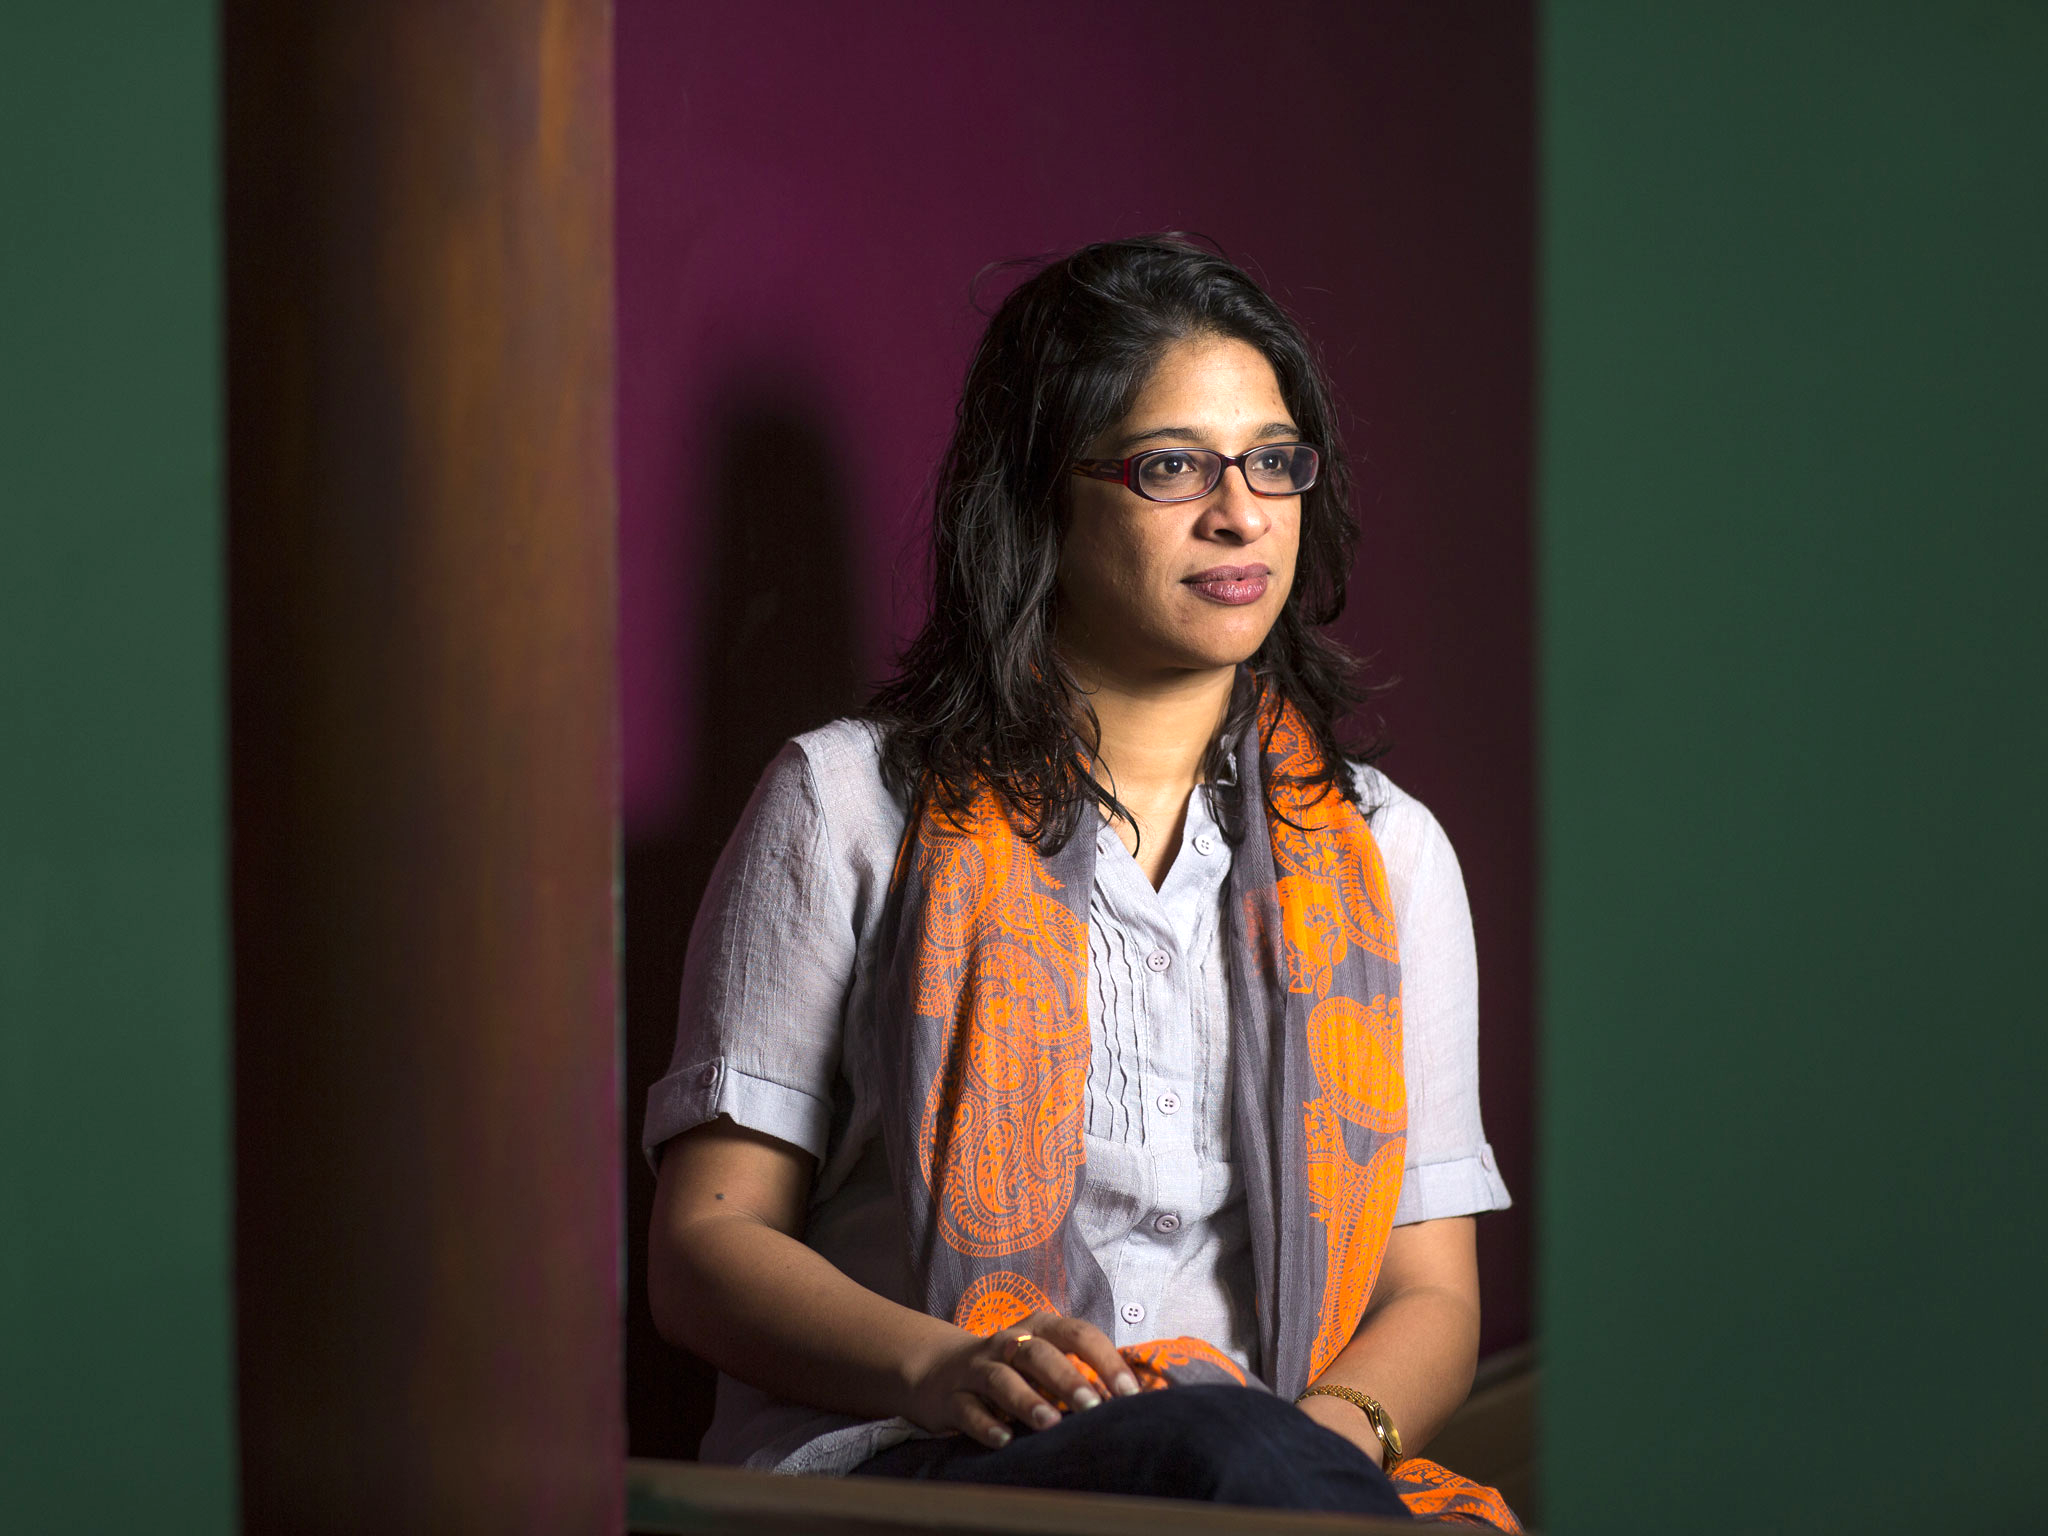 Indhu Rubasingham, the
Tricycle’s artistic director, says
it is apolitical